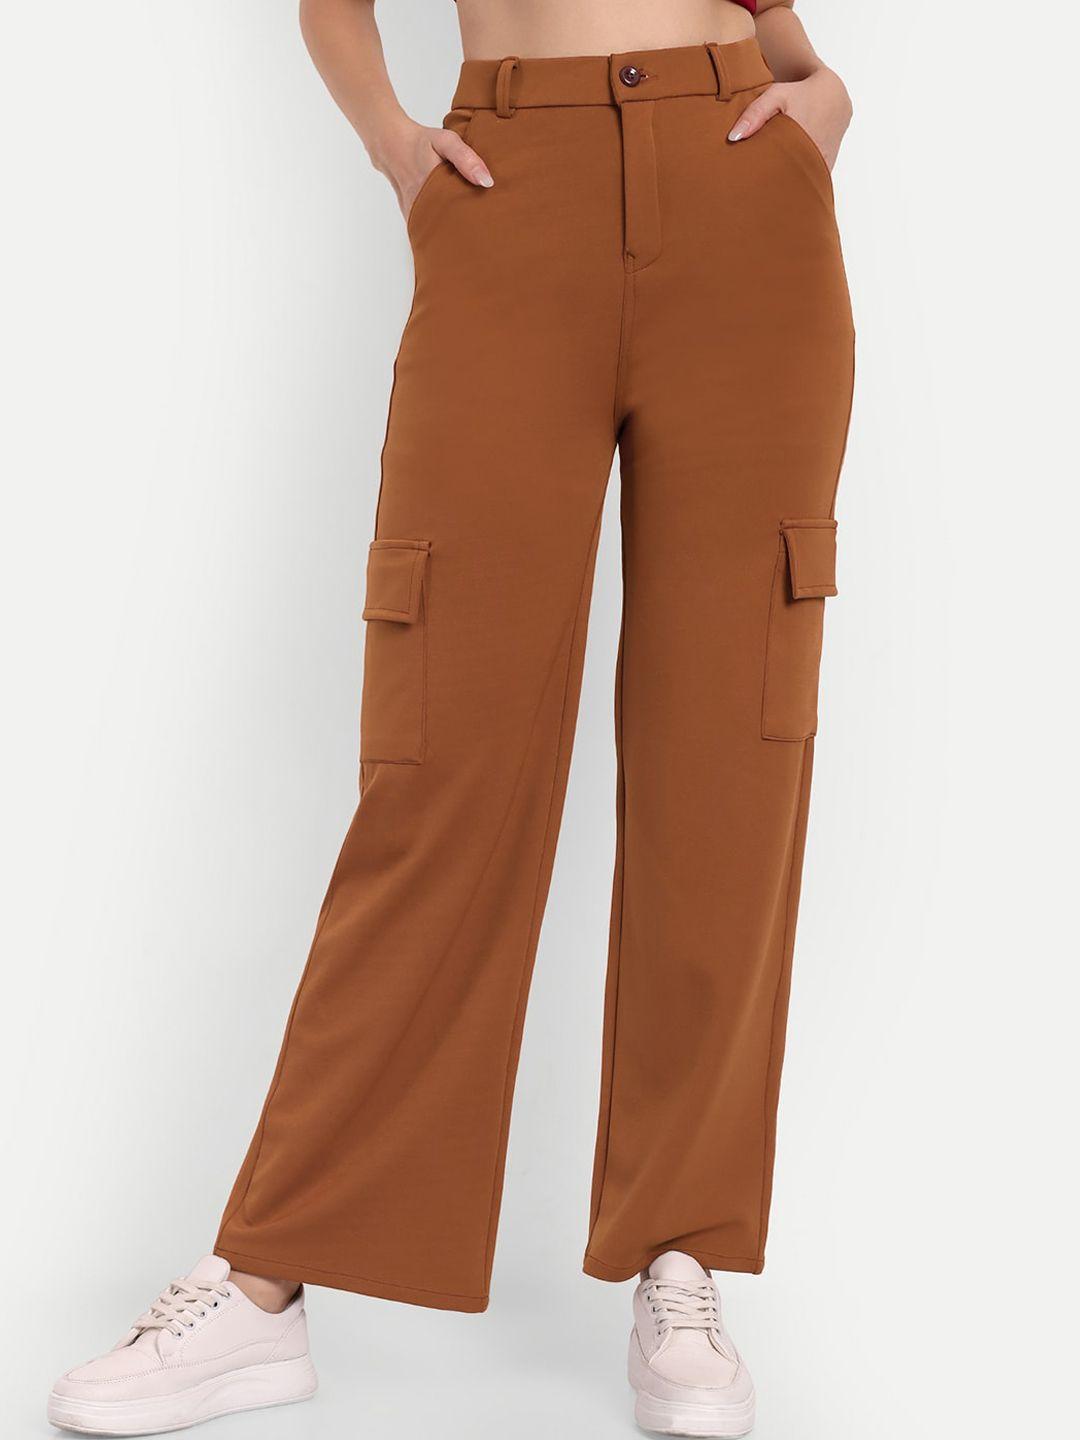 next-one-women-tan-smart-straight-fit-high-rise-easy-wash-trousers